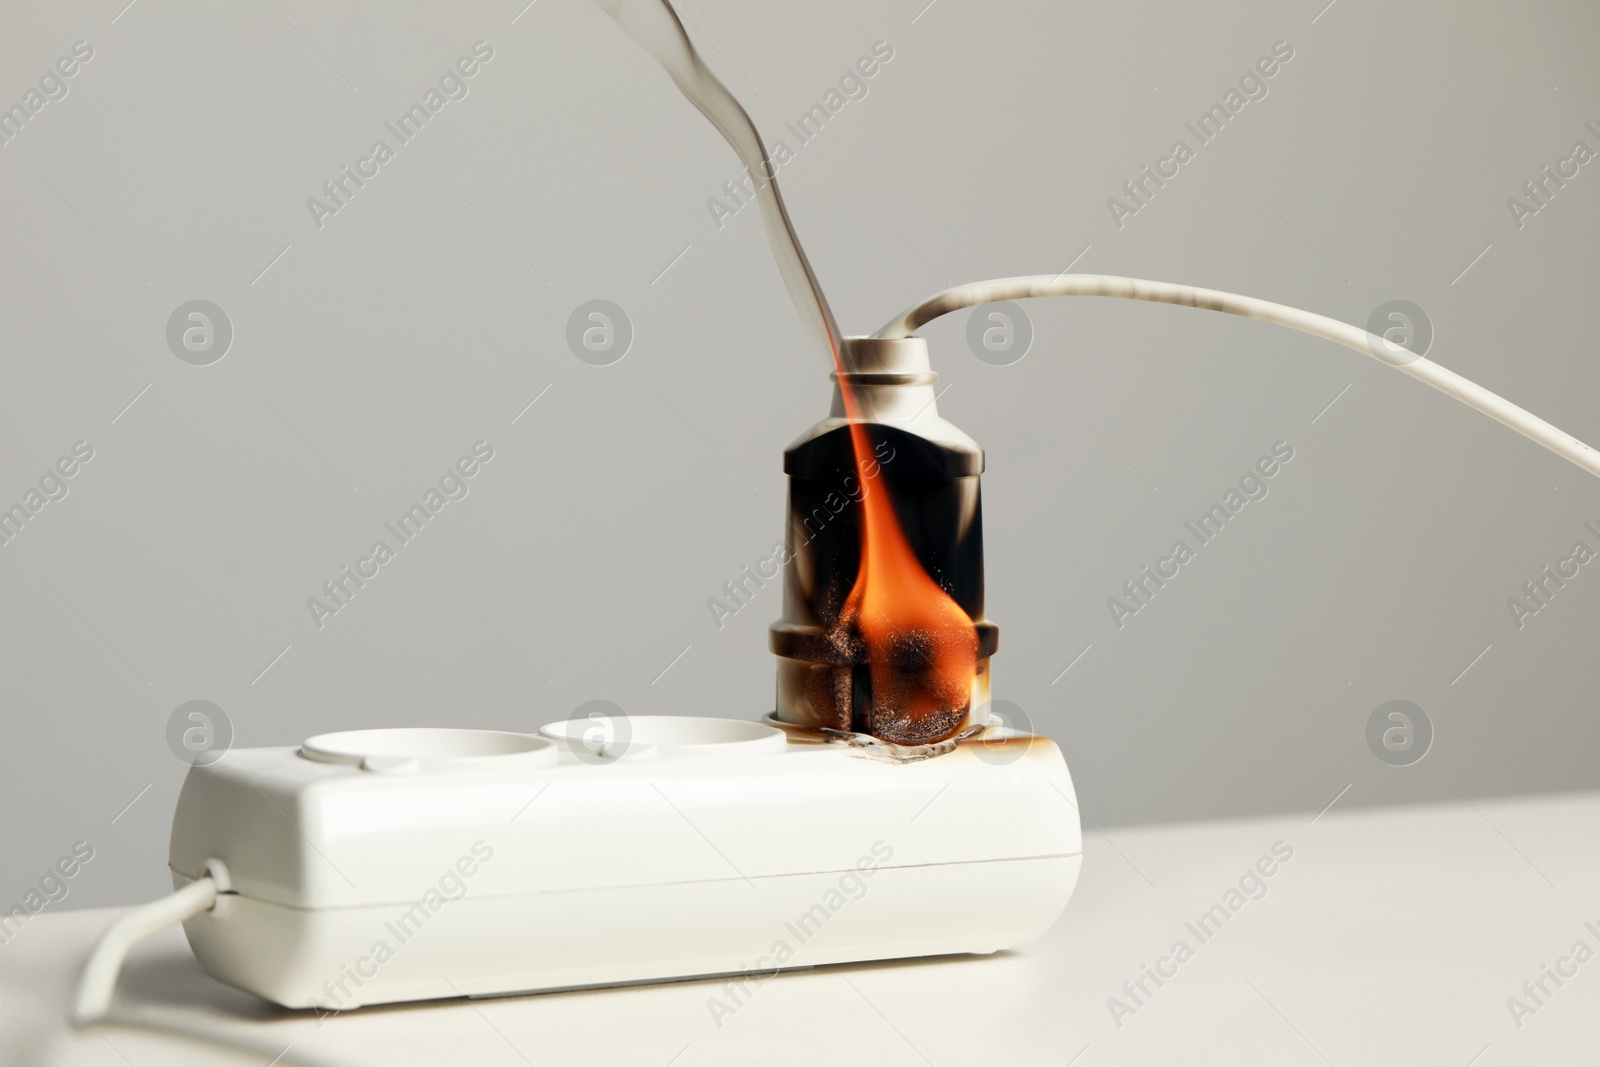 Photo of Inflamed plug in power strip on white table against grey wall. Electrical short circuit